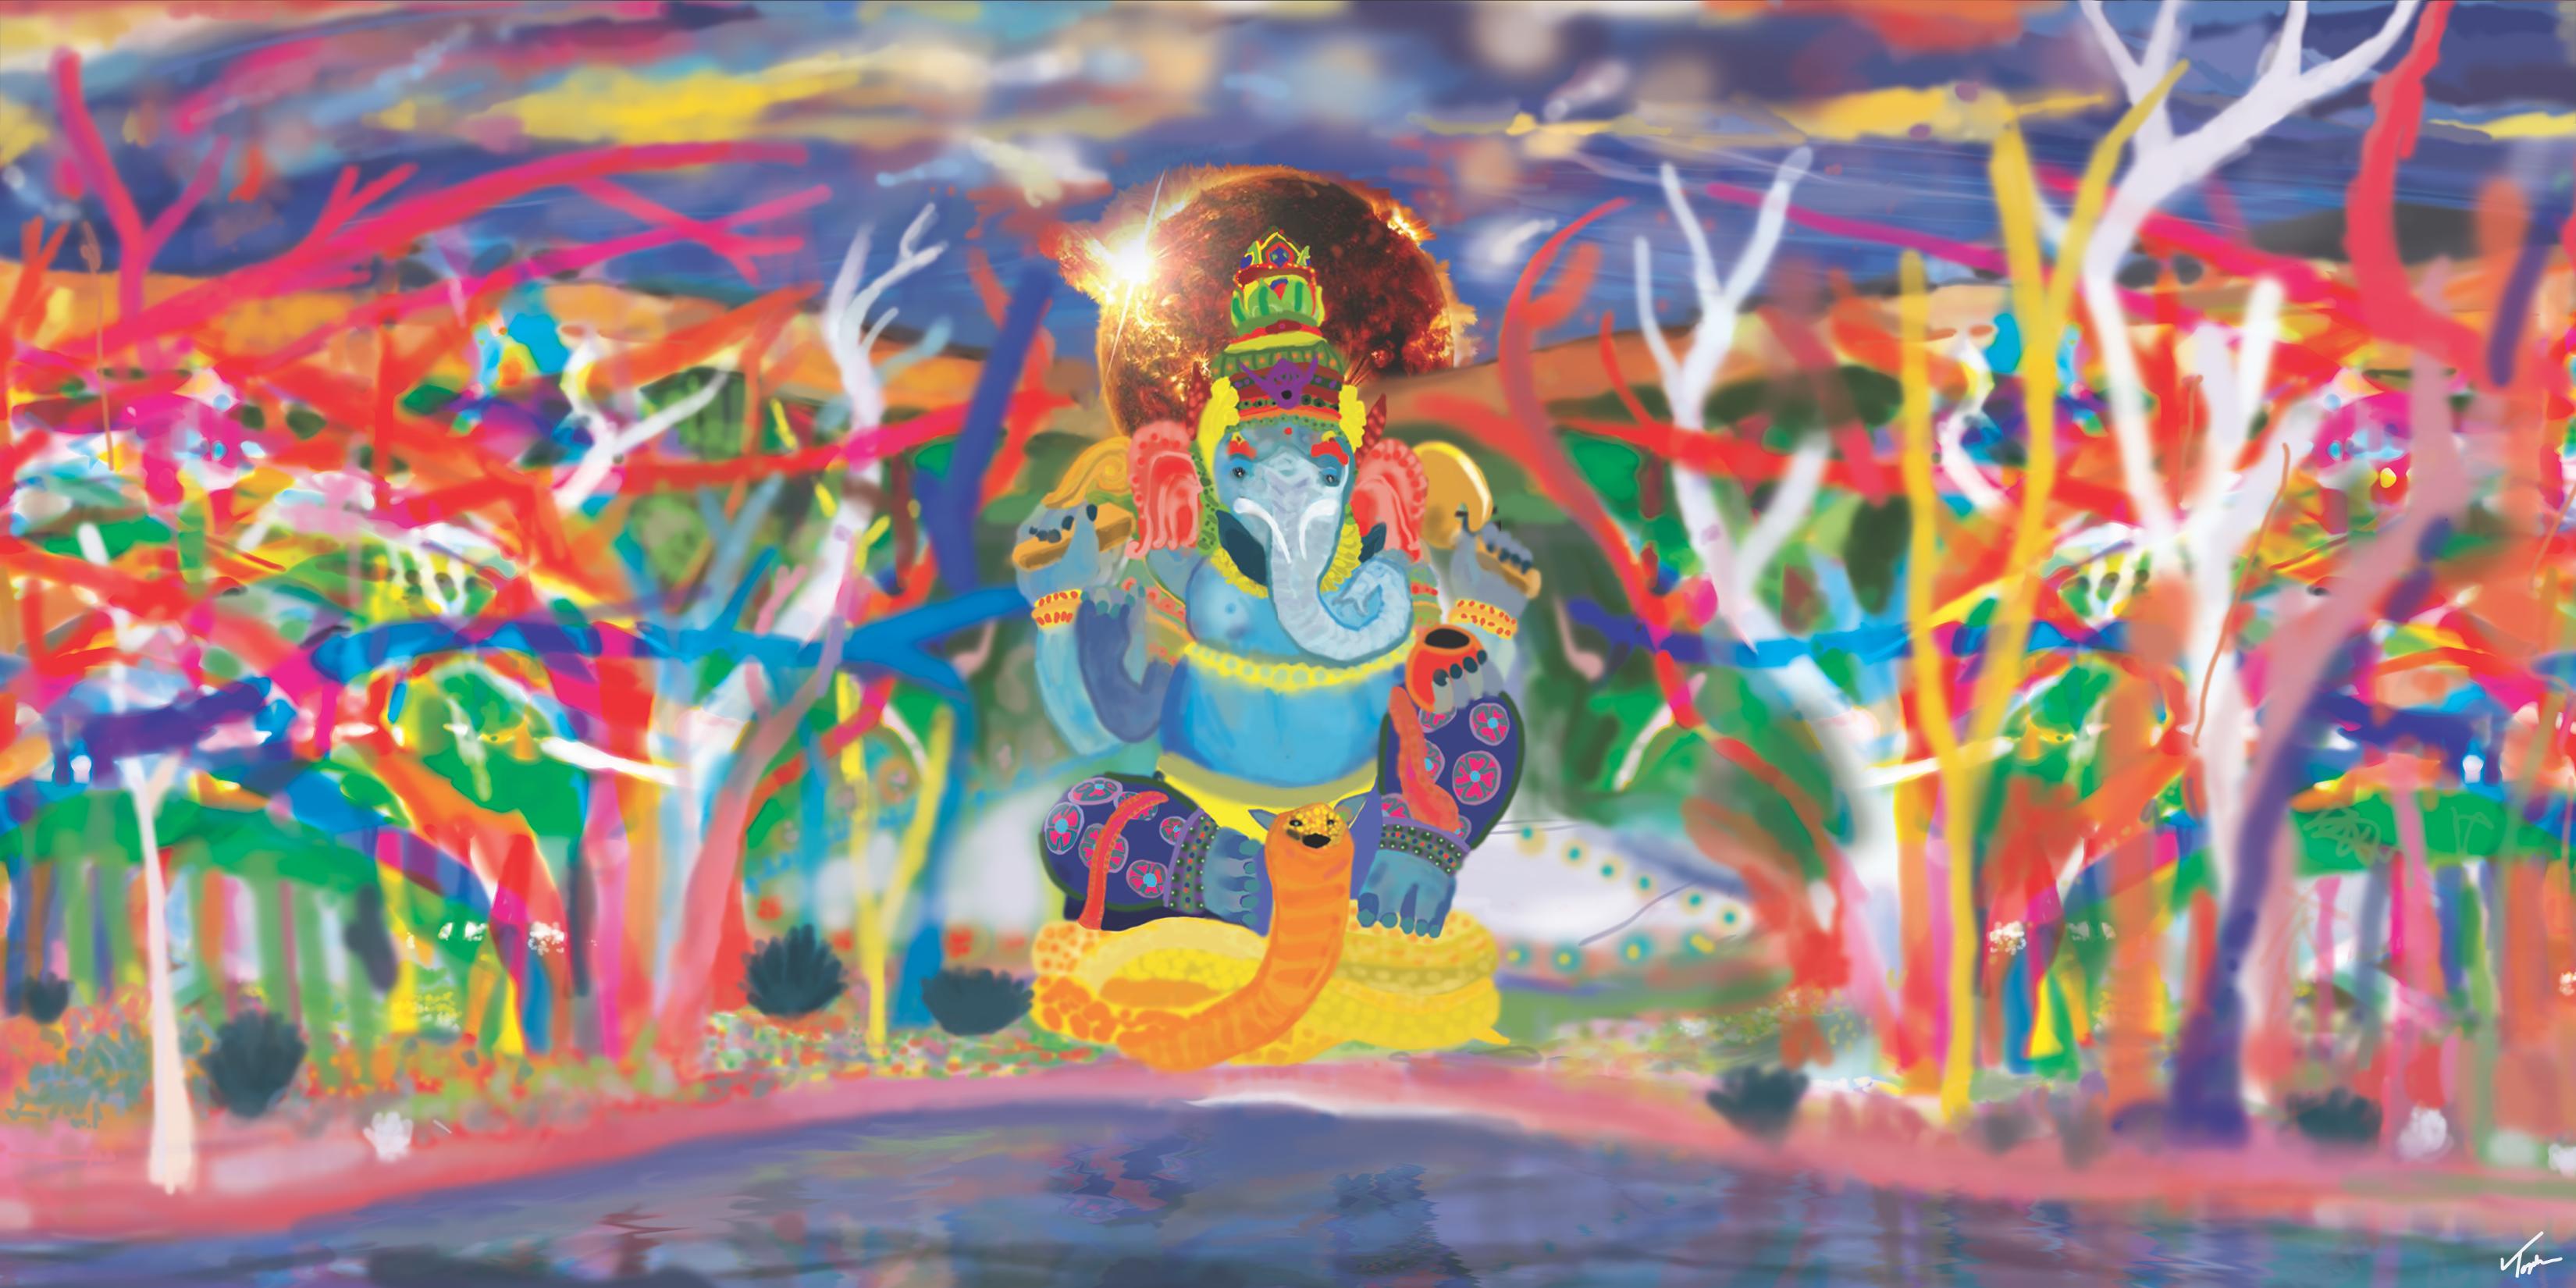 Immerse yourself in the mystical realm of the Hindu deity Ganesha with Topher Straus' captivating 